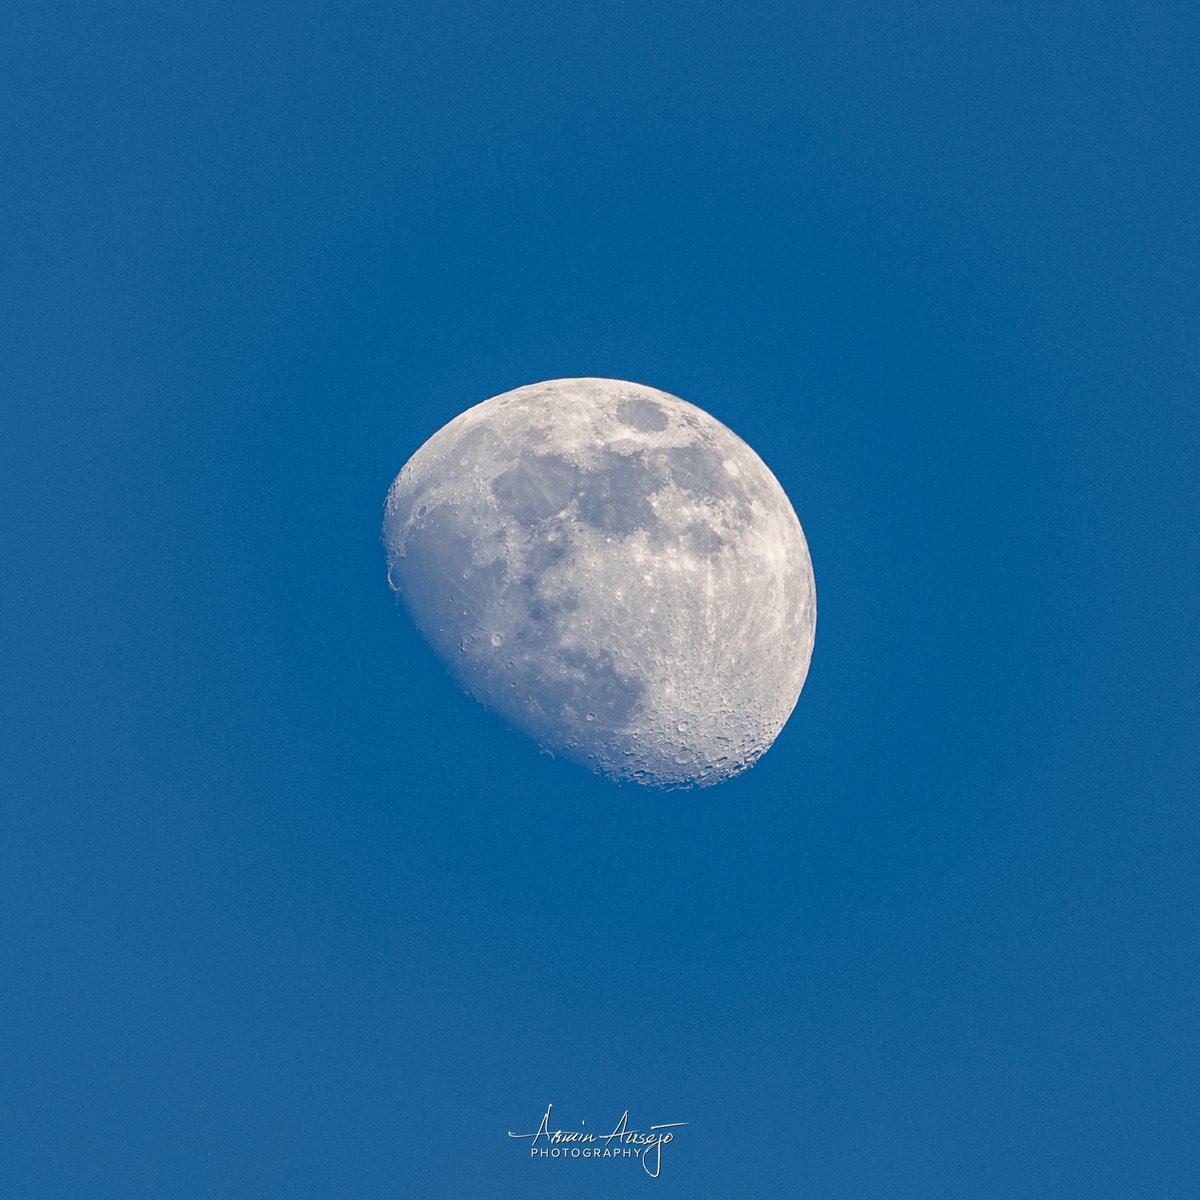 🎵 When the moon hits your eye like a big pizza pie... 🎶

Nikon Z7, Nikkor 100-400mm f/4.5-5.6S, handheld at 1/125 sec f/8 ISO 100

#moon #gibbousmoon #waxinggibbous #waxinggibbousmoon #handheld #handheldphotography #lunarphotography #lunarphases #Nikon #Z7 #ArminPhoto